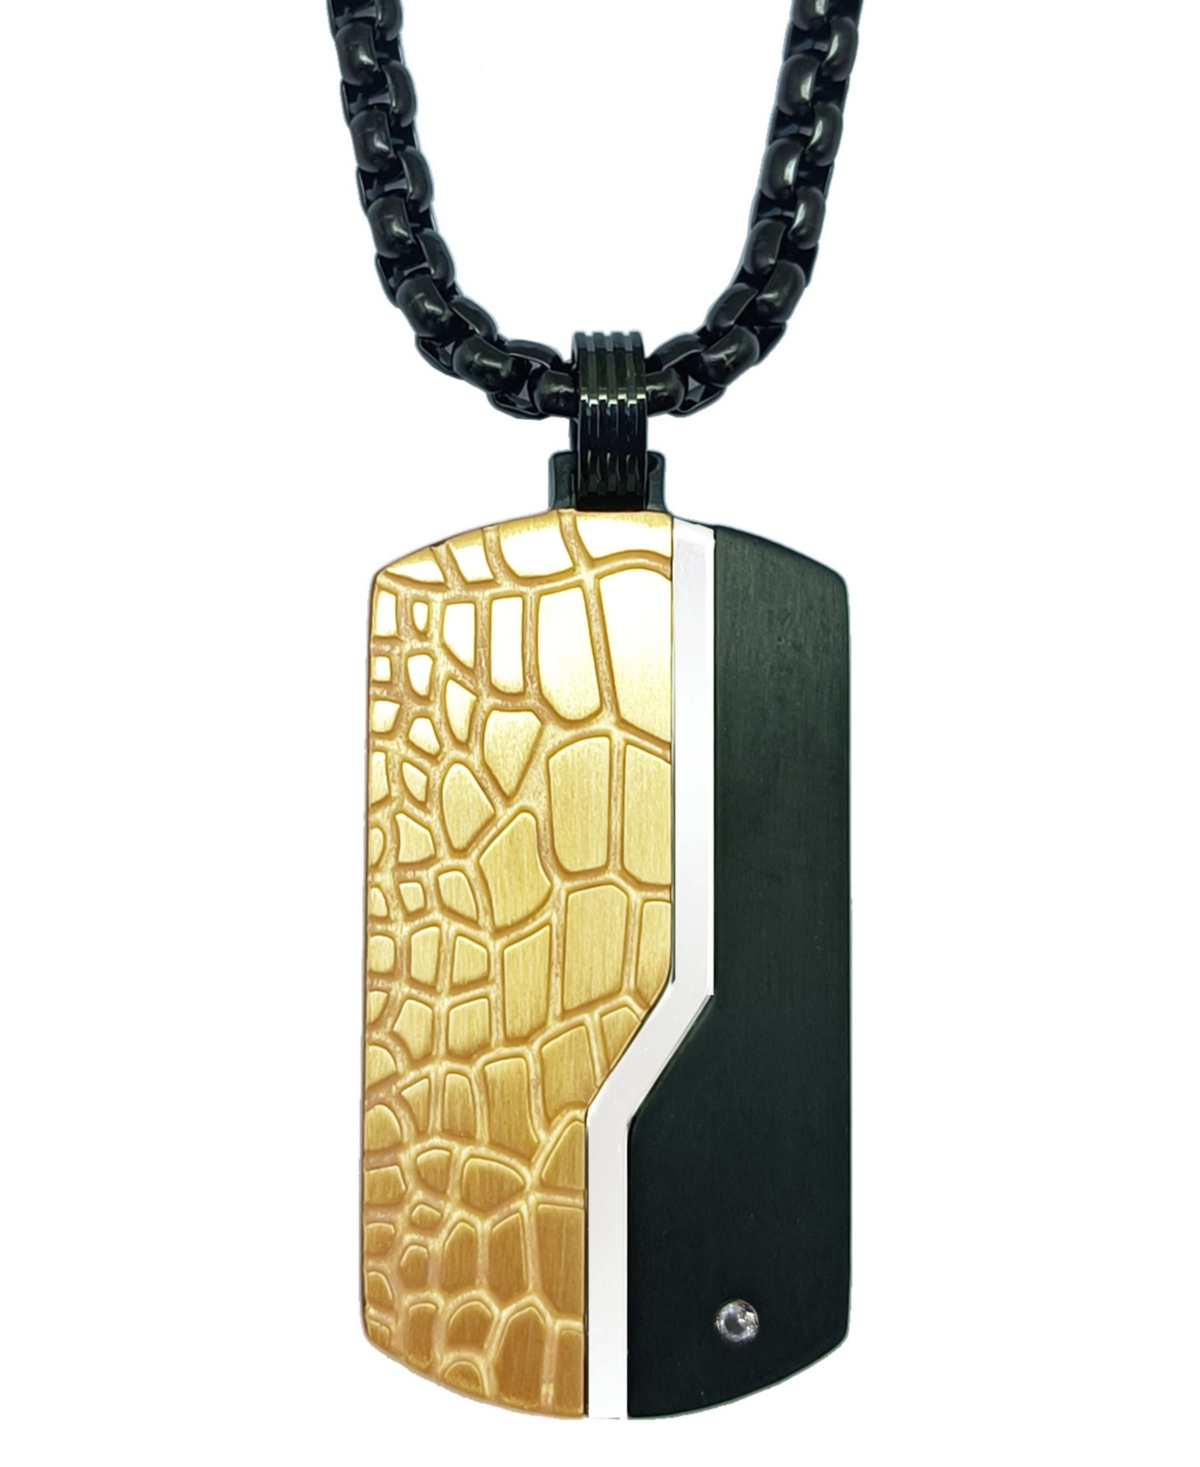 Diamond Accent Dog Tag 22" Pendant Necklace in Black & Gold-Tone Ion Plated Stainless Steel - Black